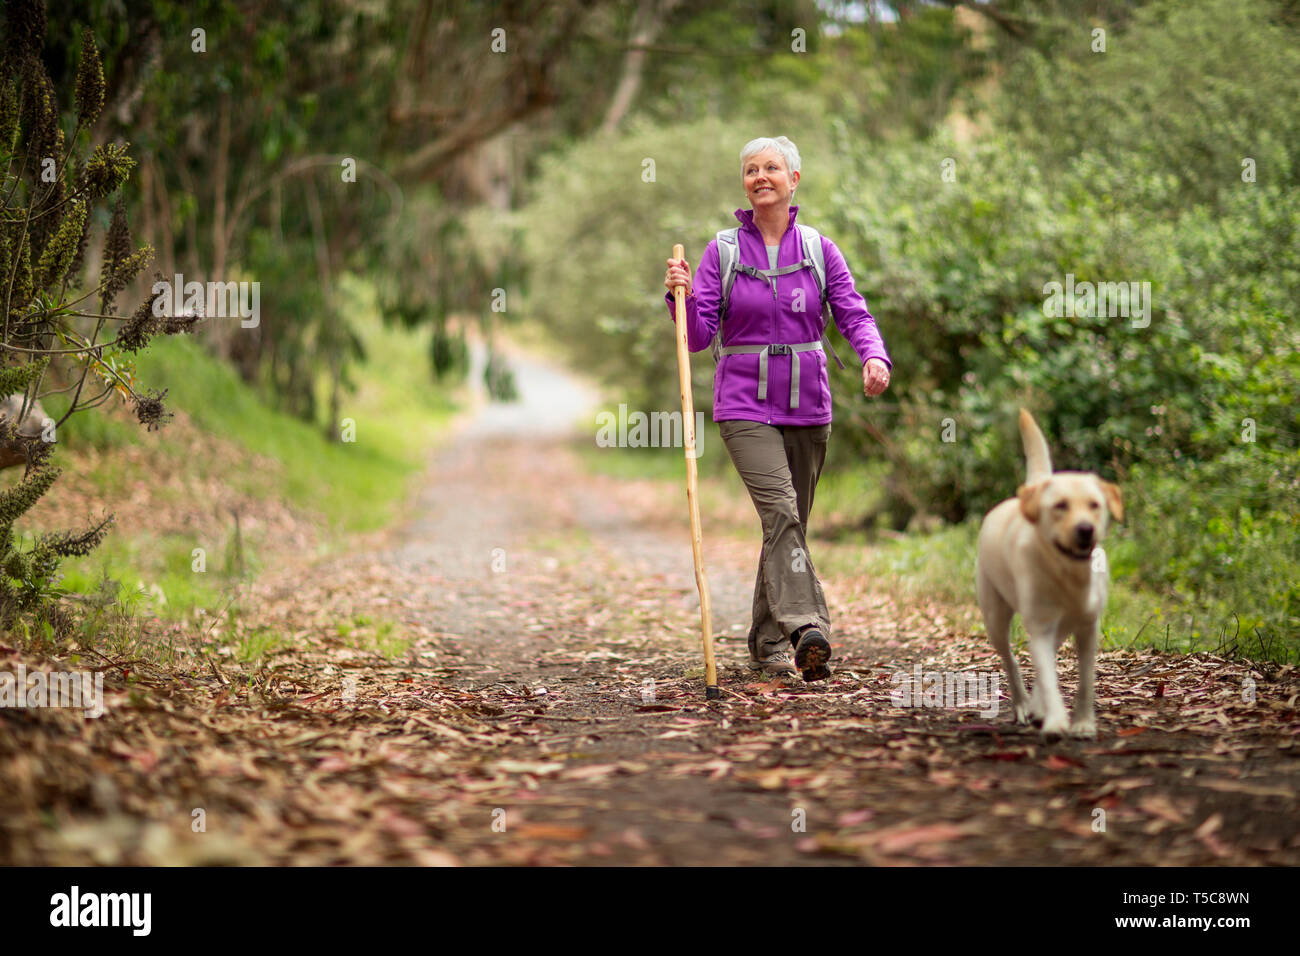 Mature woman on a rural hike with her dog. Stock Photo